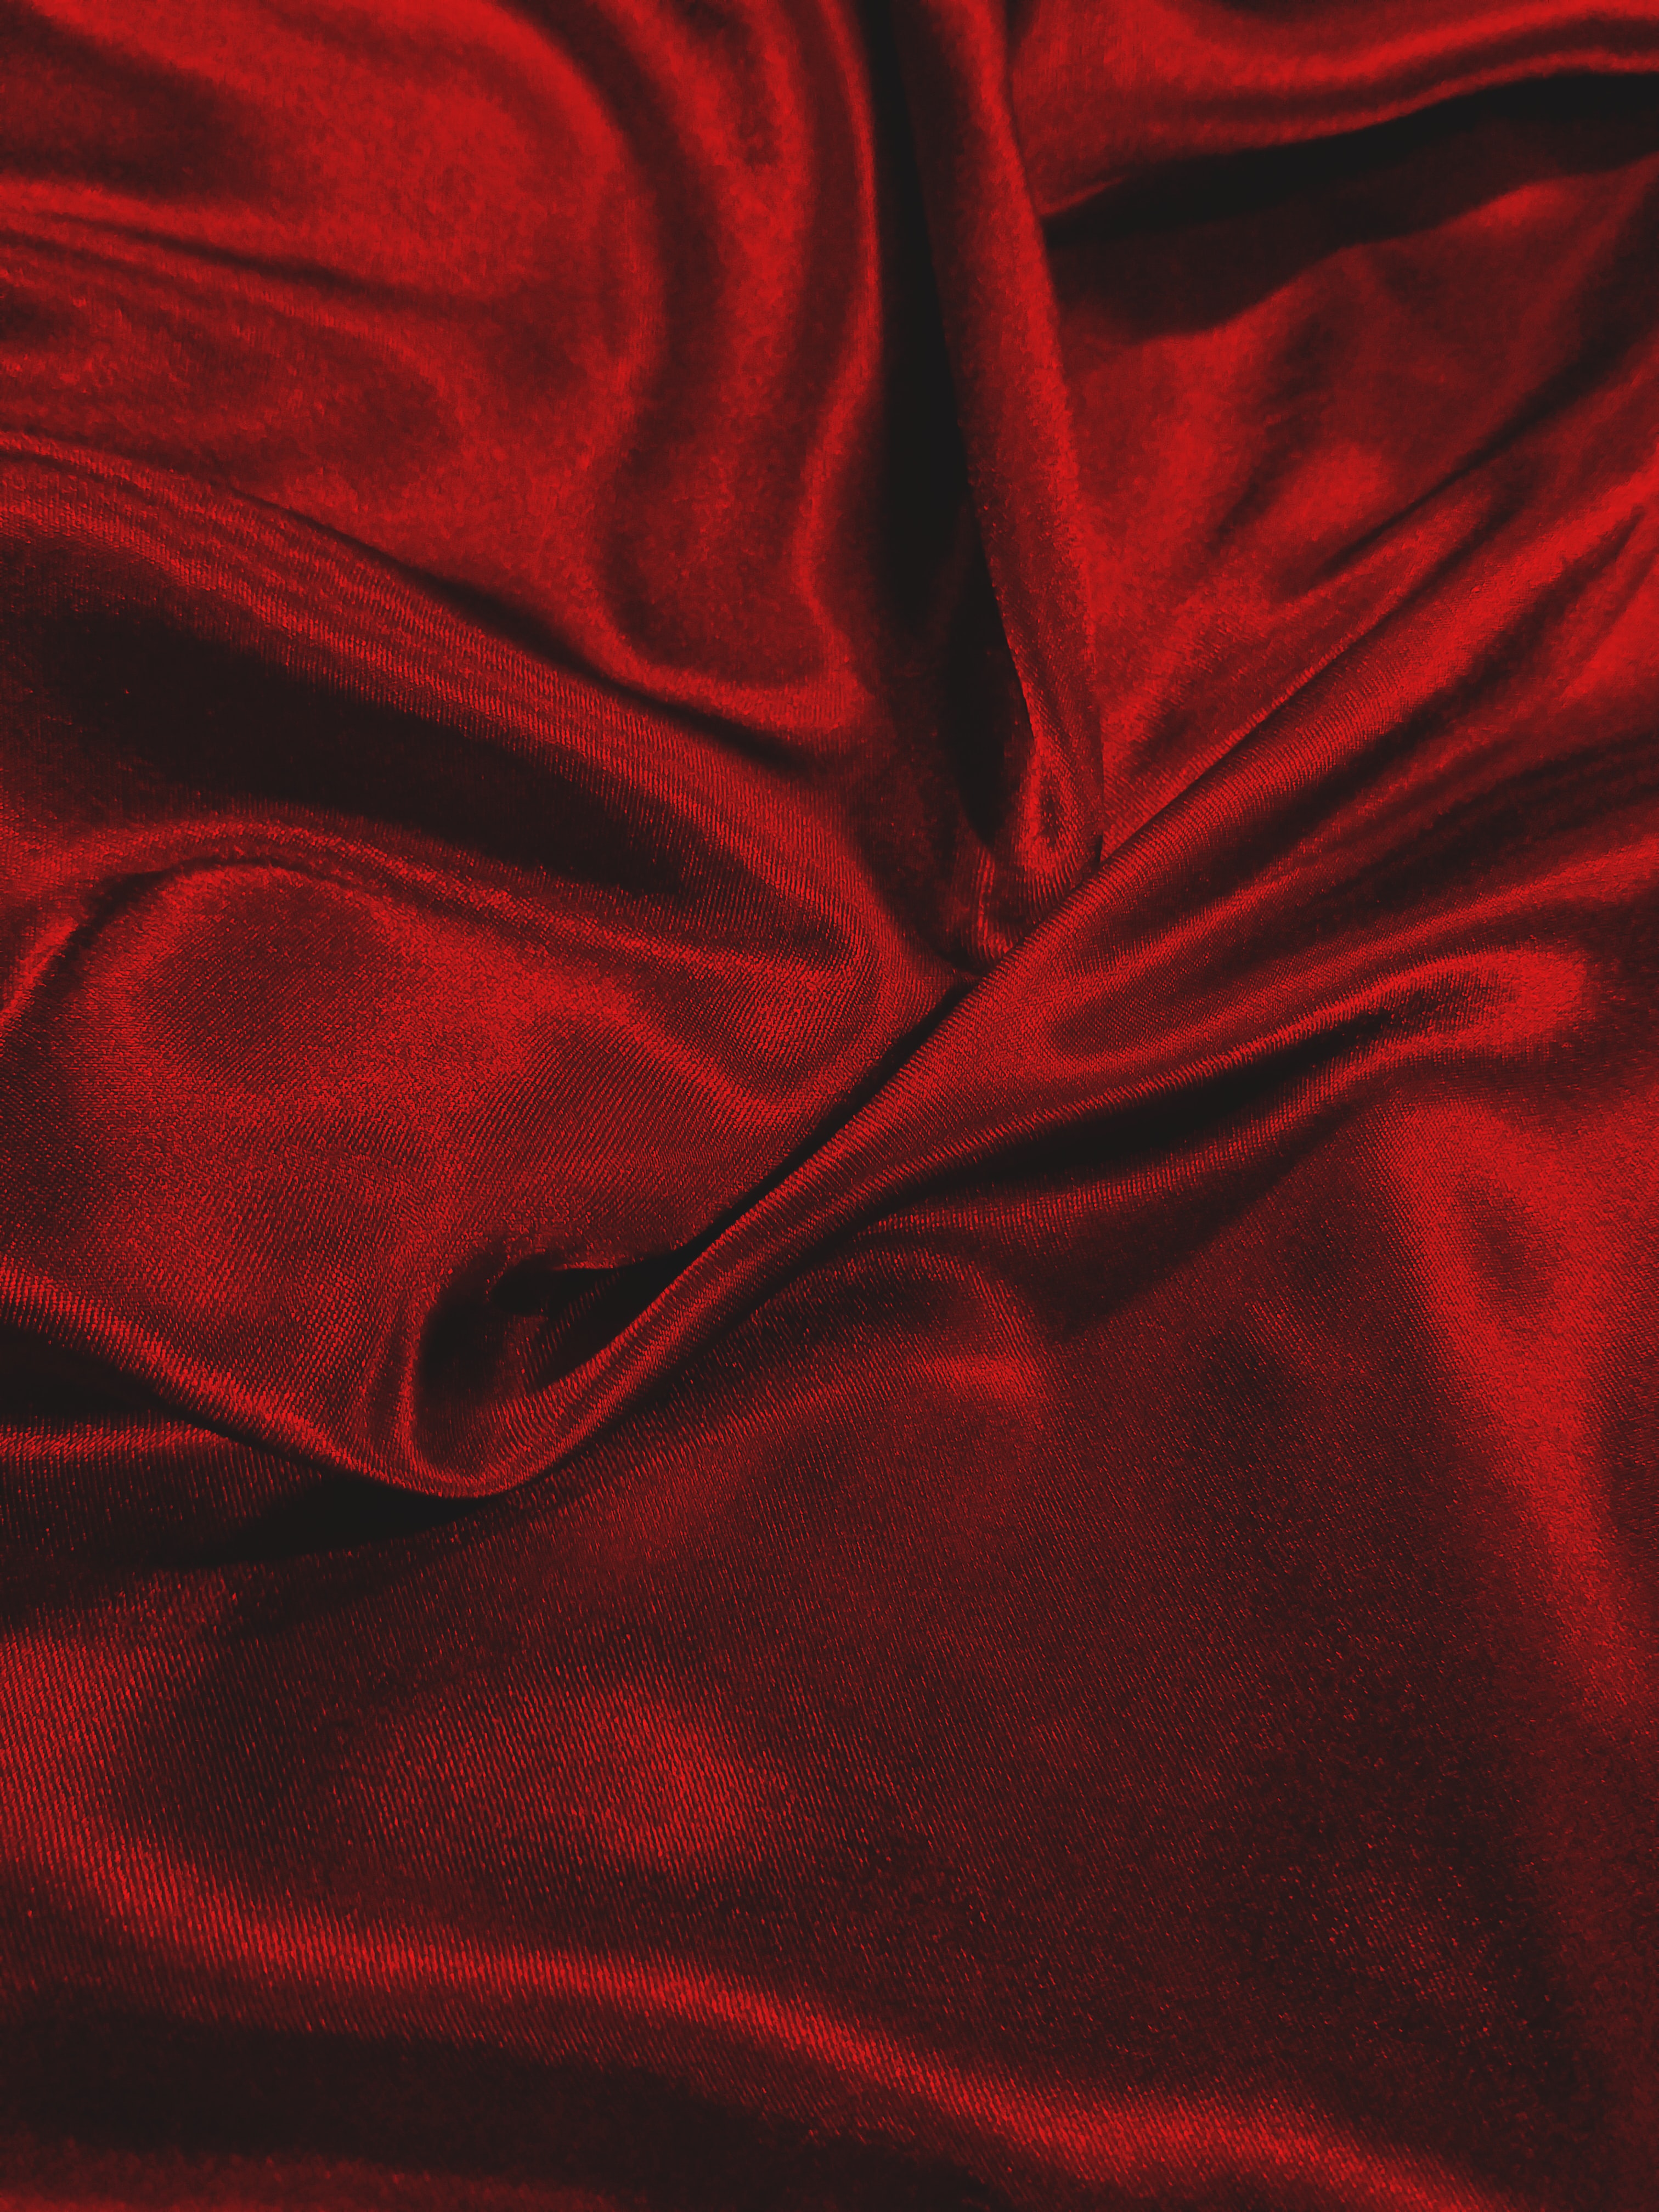 Mier: Red Satin Jazz